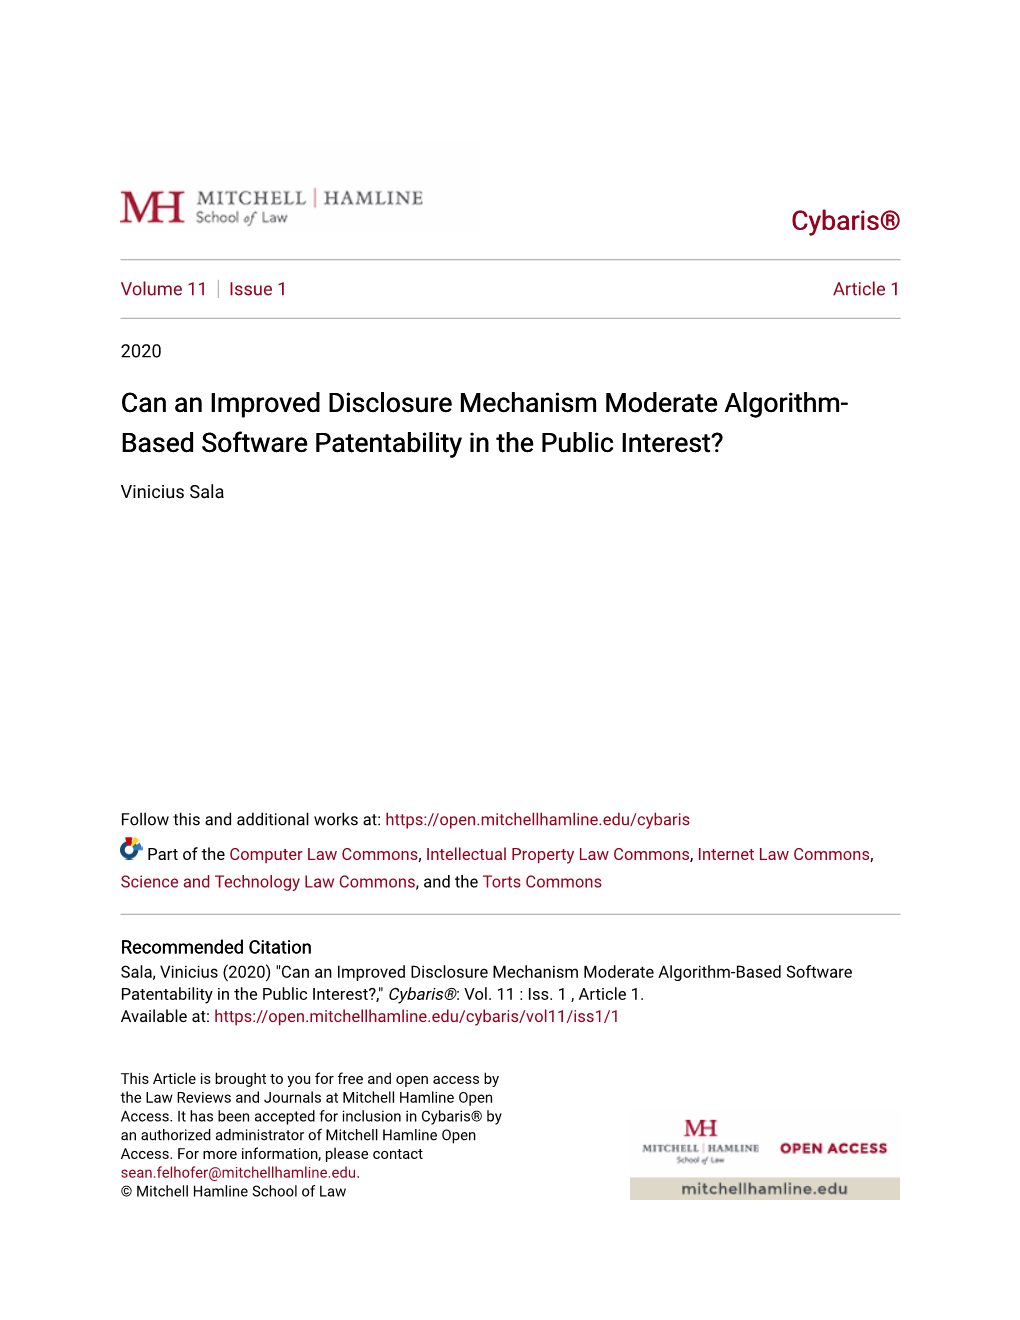 Can an Improved Disclosure Mechanism Moderate Algorithm-Based Software Patentability in the Public Interest?," Cybaris®: Vol